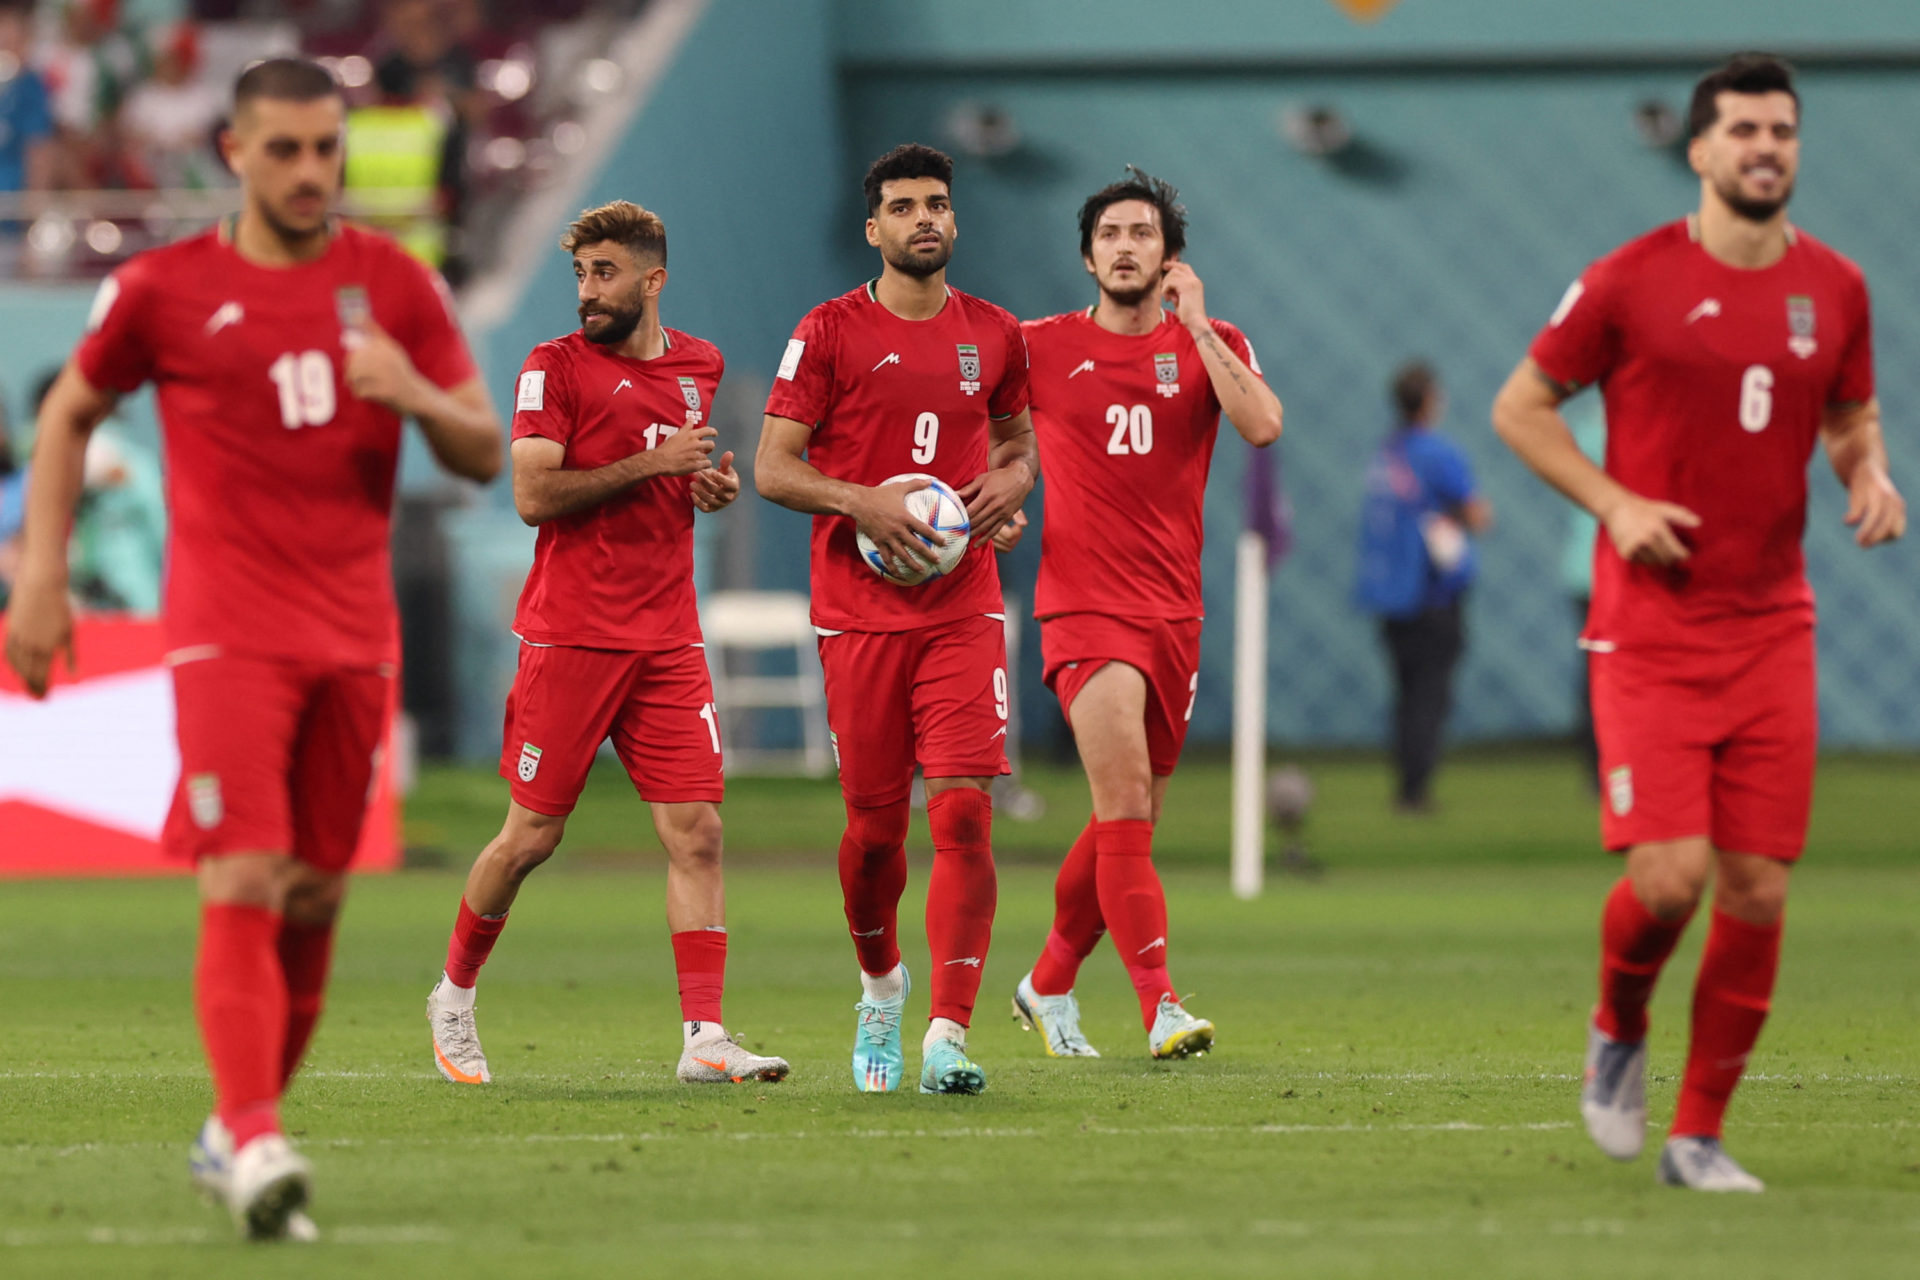 Iran had a tough afternoon against England